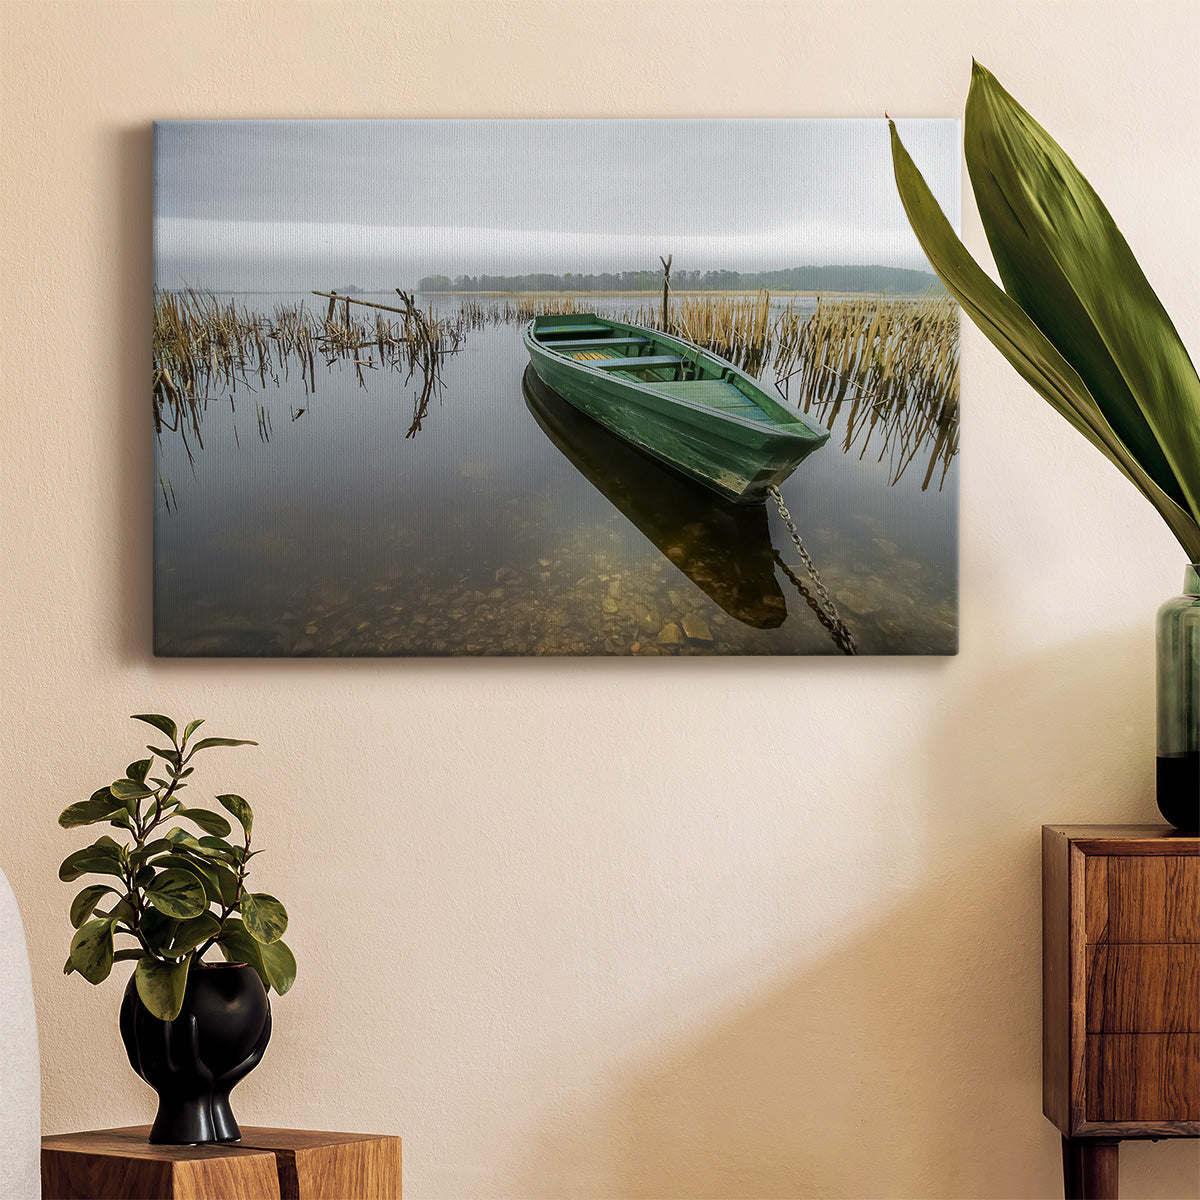 Green One Premium Gallery Wrapped Canvas - Ready to Hang